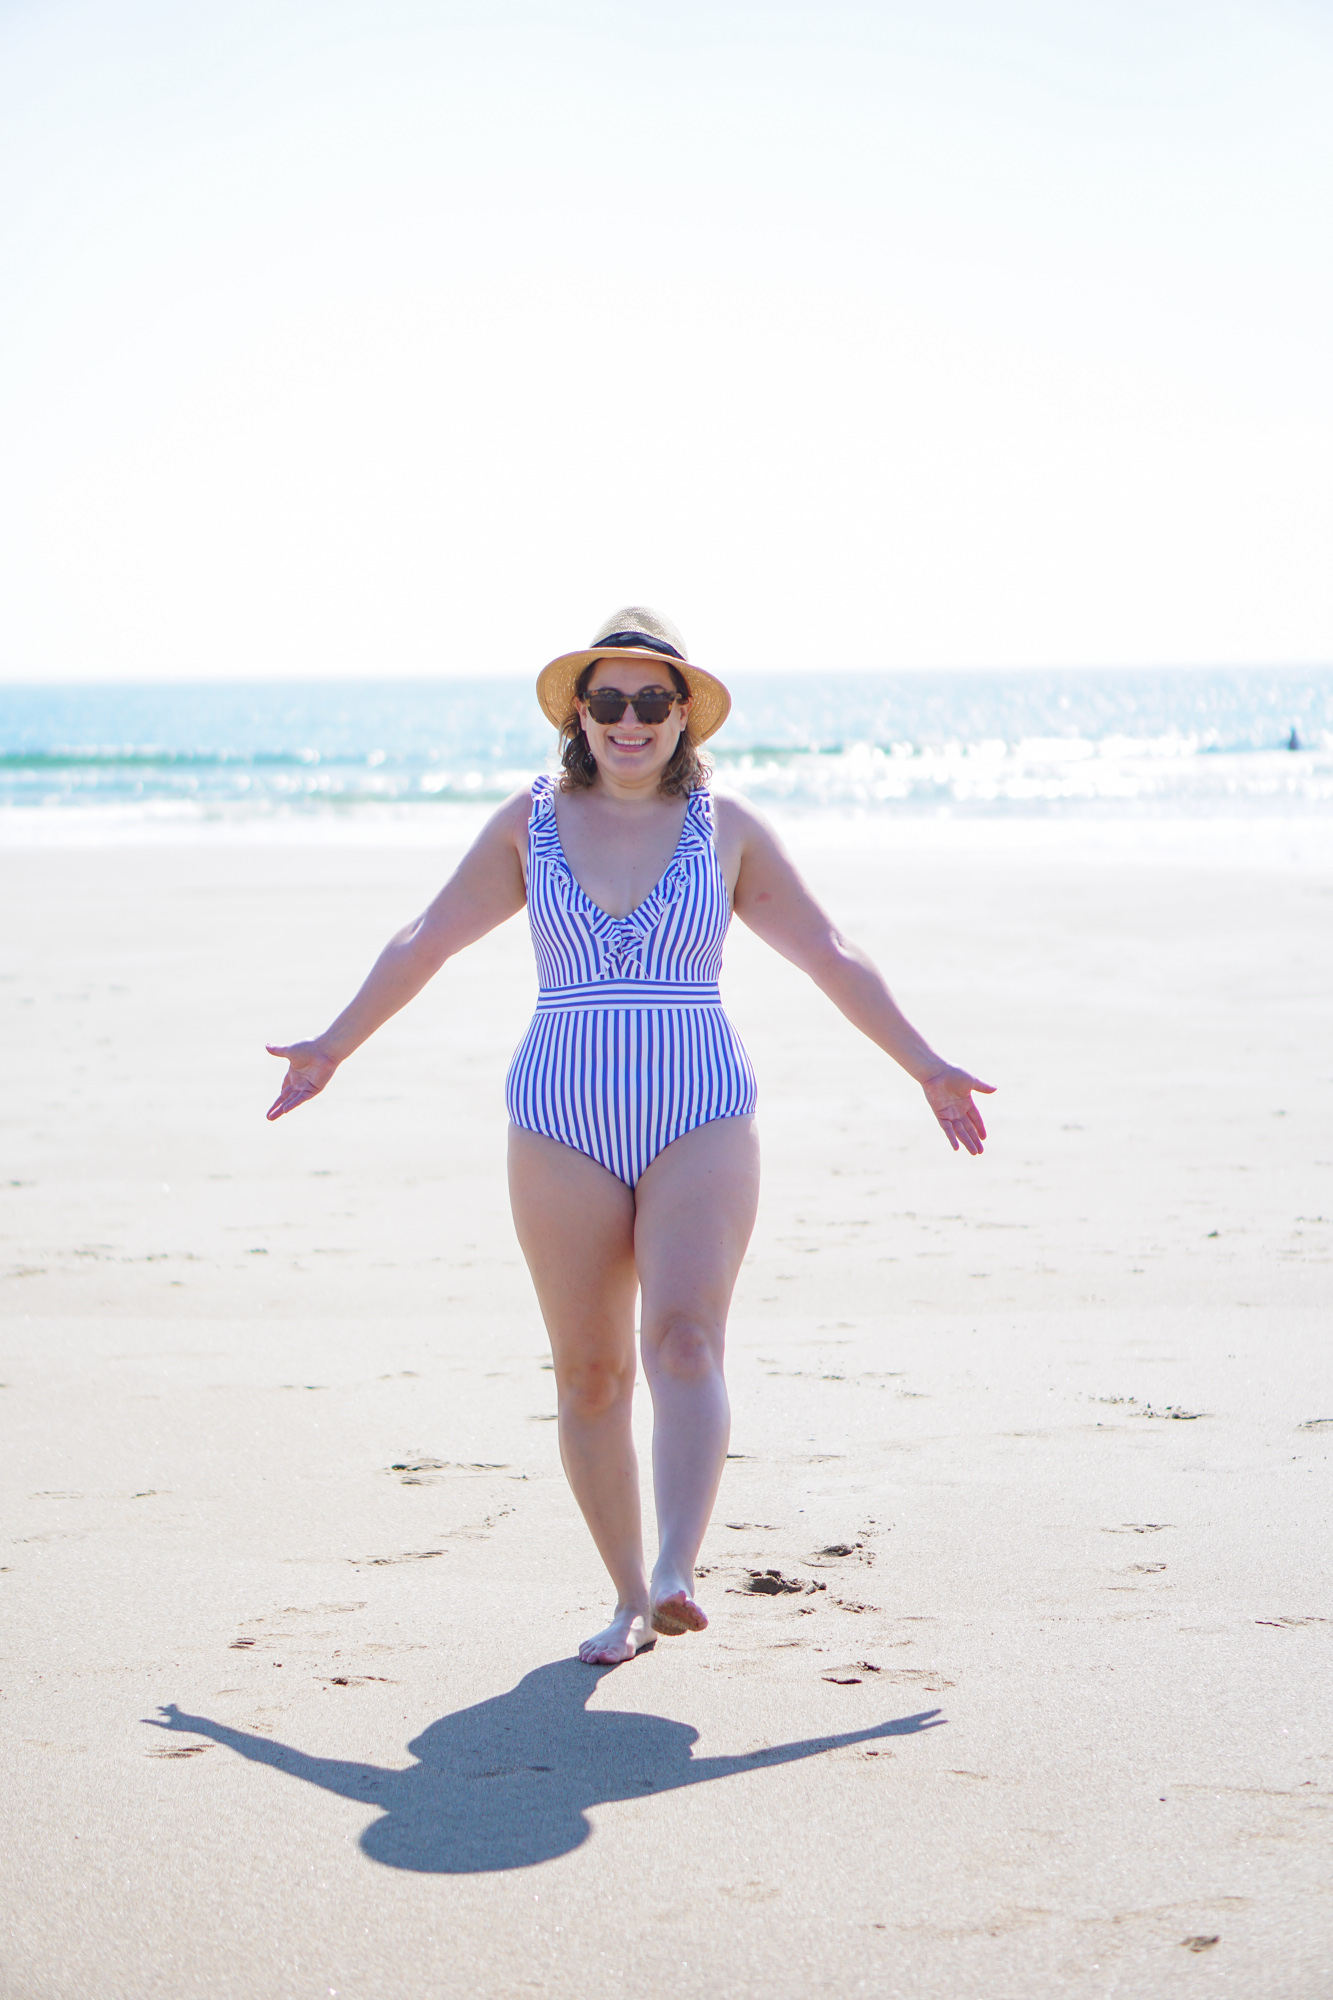 How to feel good in a swimsuit